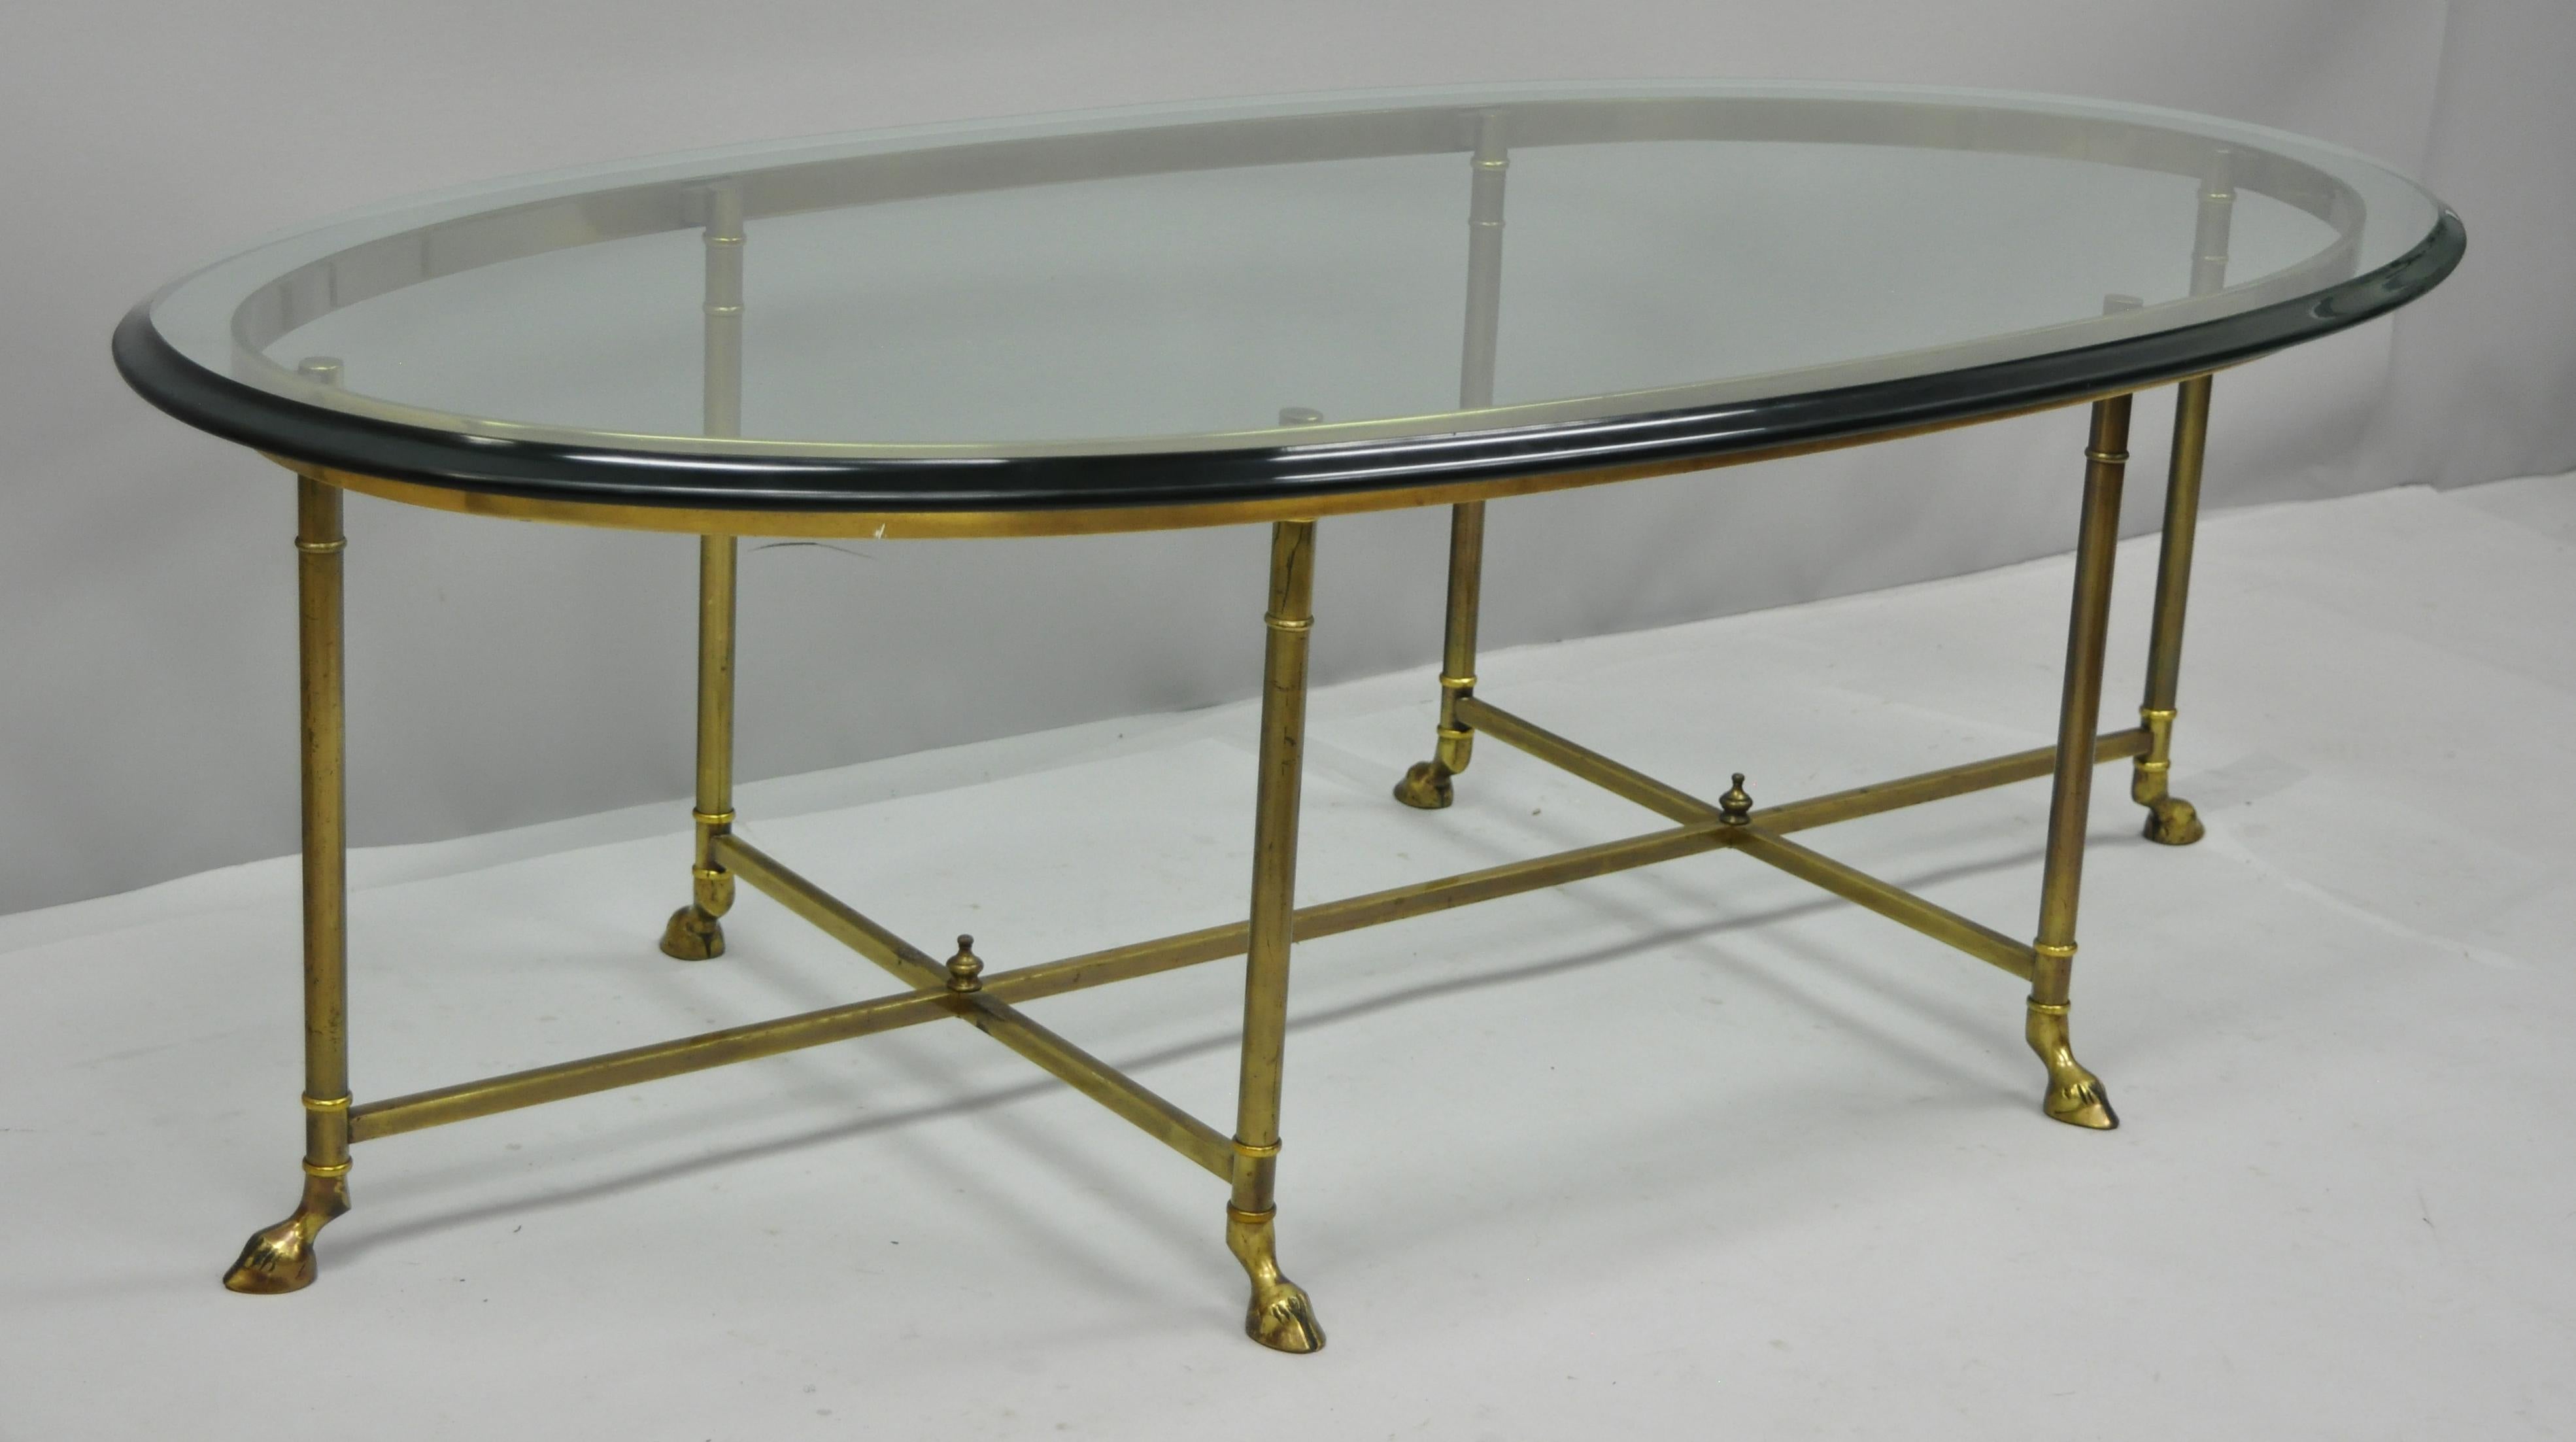 Brass and glass oval Italian coffee table with hoof feet by Labarge. Item features a rare style with 6 legs and hoof feet, thick oval beveled glass, and brass frame, circa mid-late 20th century. Measurements: 17